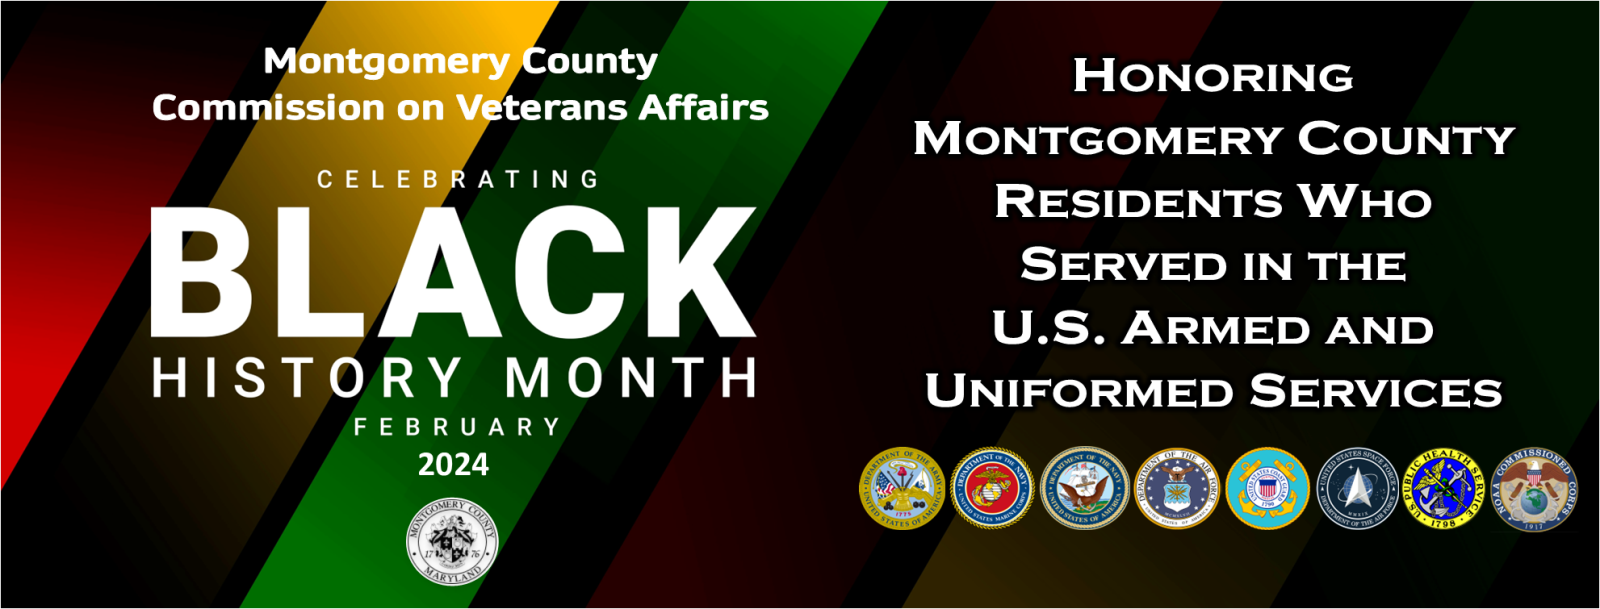 Black History Month Honoring Montgomery County Residents Who Served in the U.S. Armed or Uniformed Services